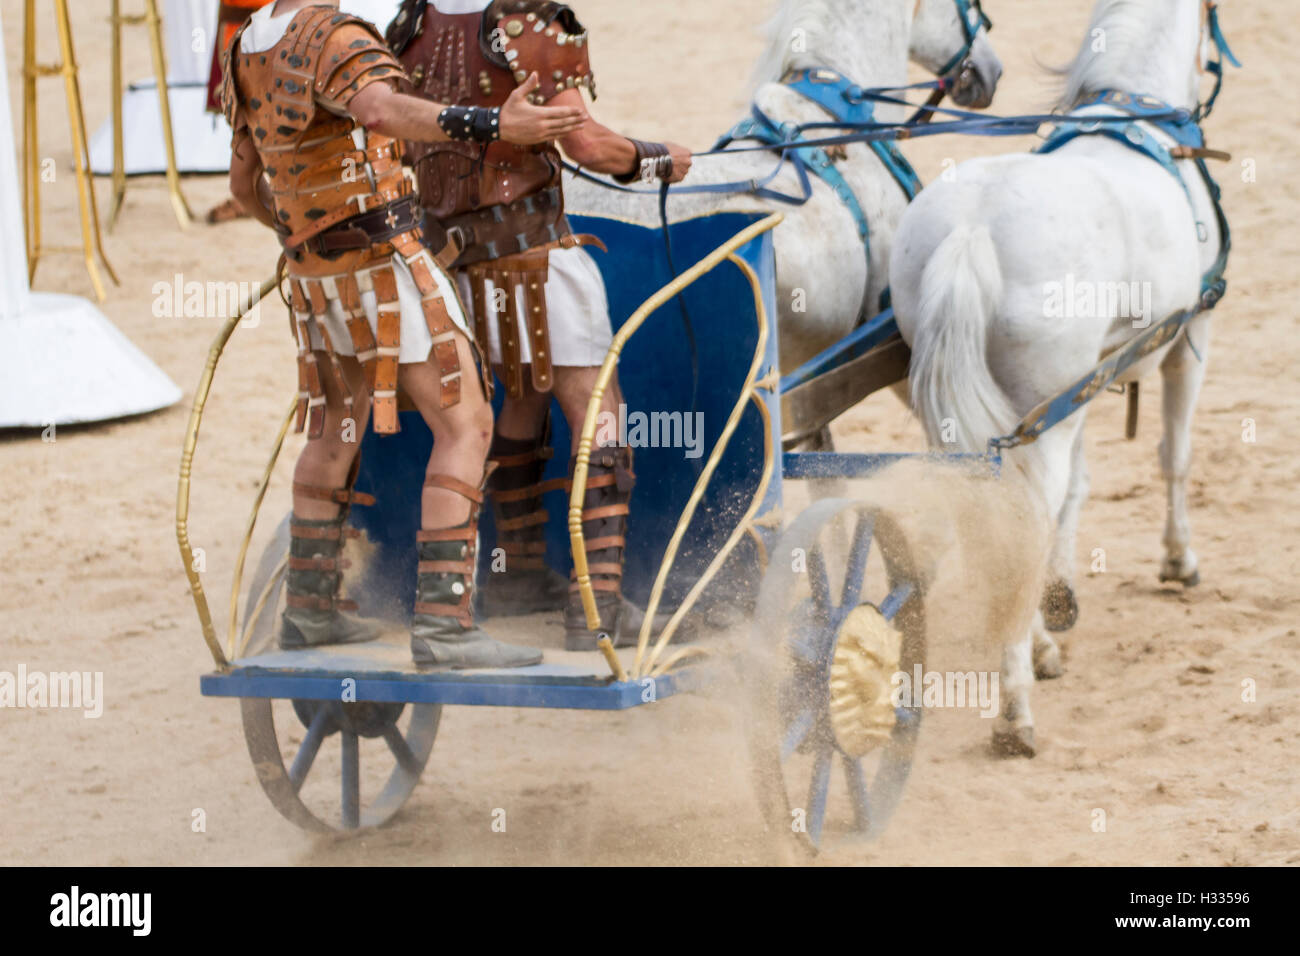 Warriors, Roman chariot in a fight of gladiators, bloody circus Stock Photo